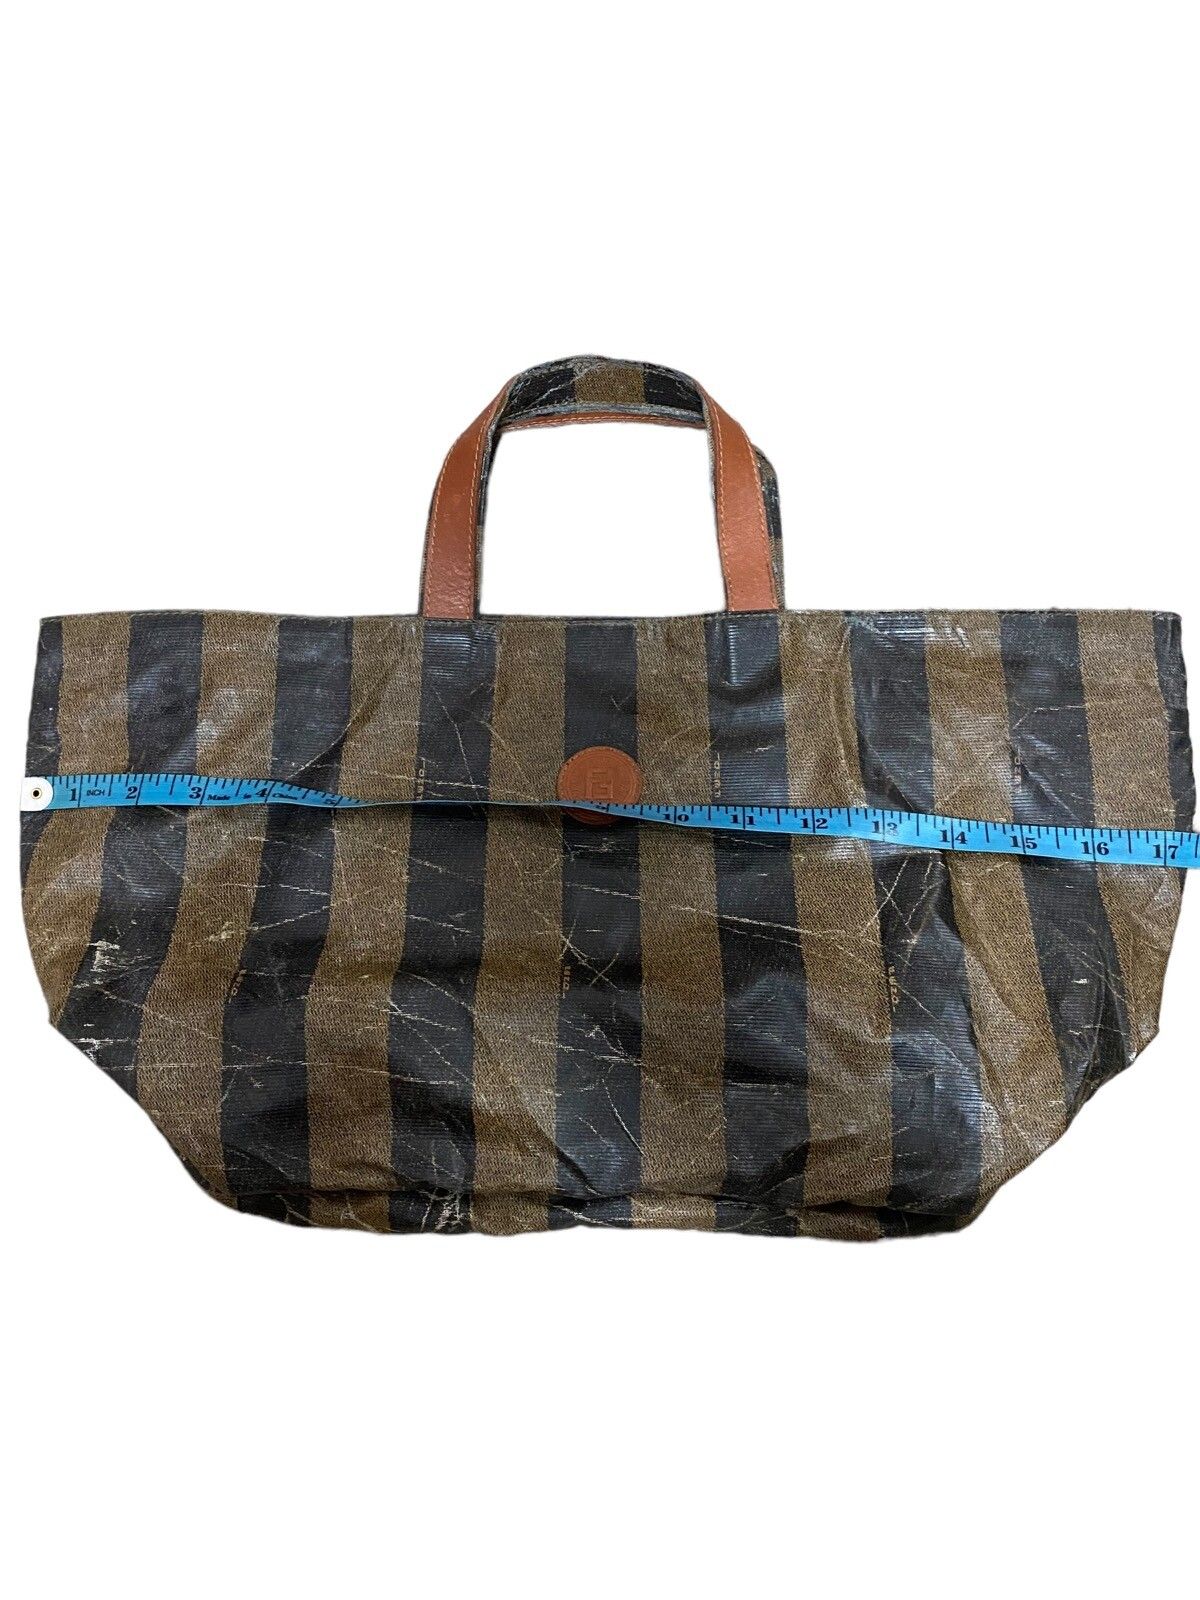 Fendi Roma Pequin Striped Tote Bag Made In Italy - 9